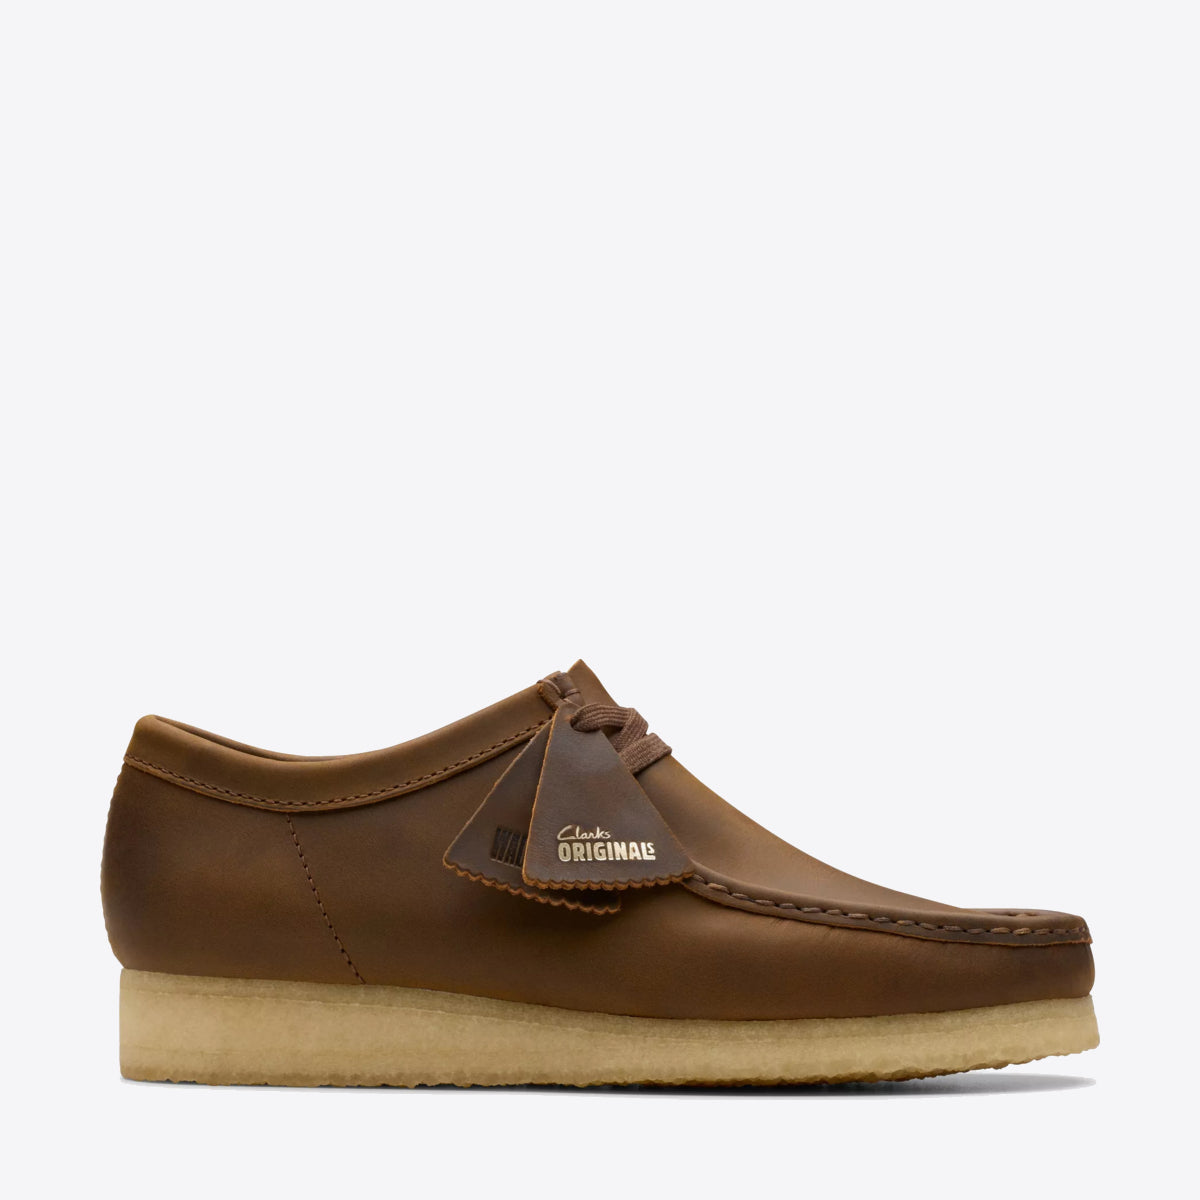 CLARKS Wallabee Shoe Suede Beeswax - Image 1